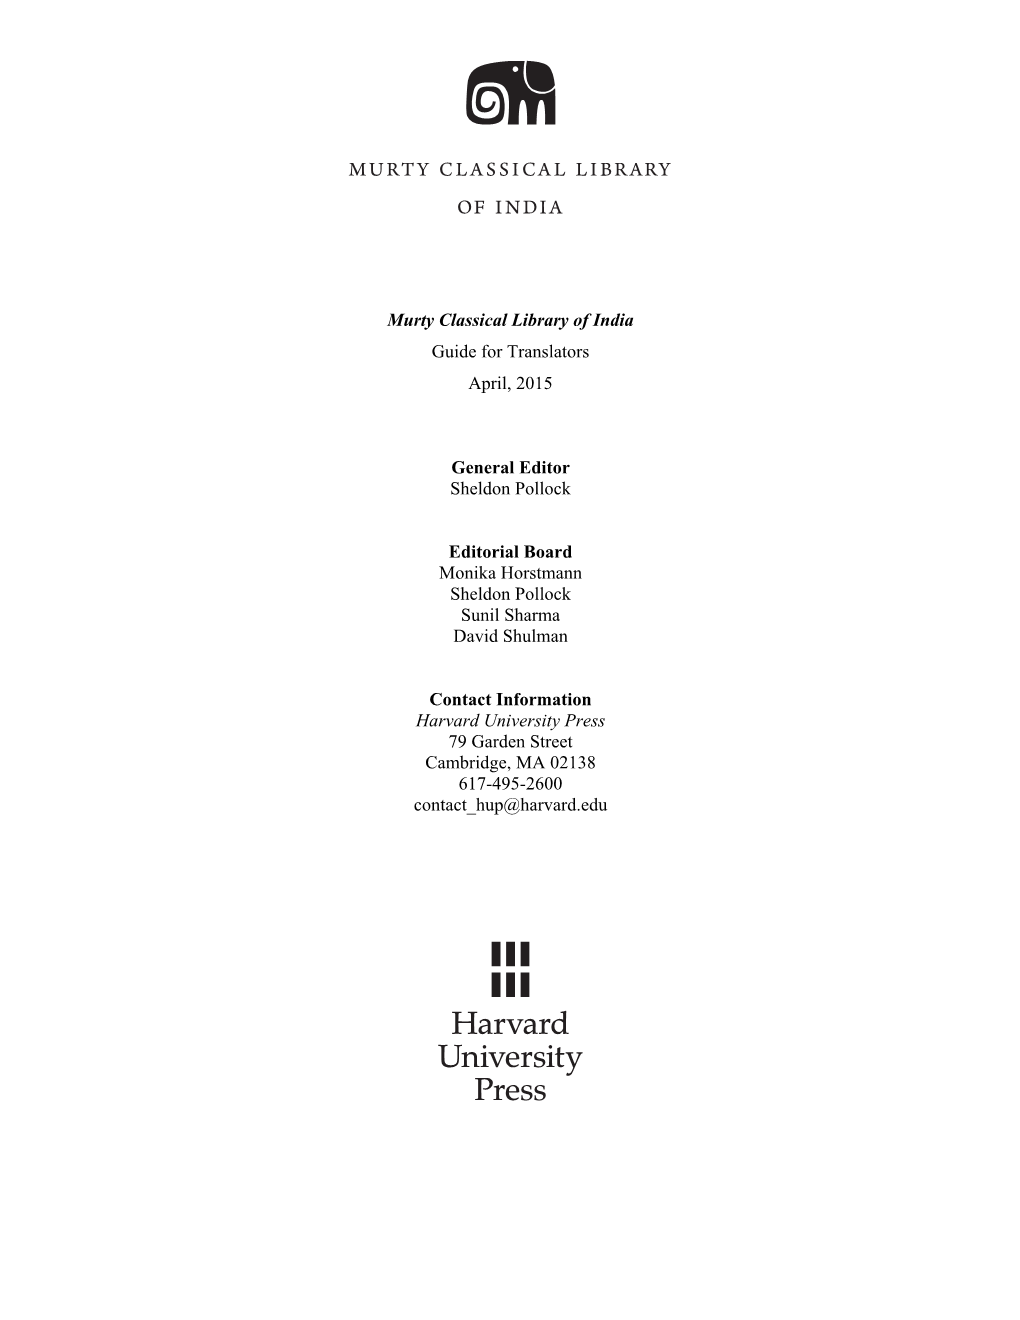 Murty Classical Library of India Guide for Translators April, 2015 General